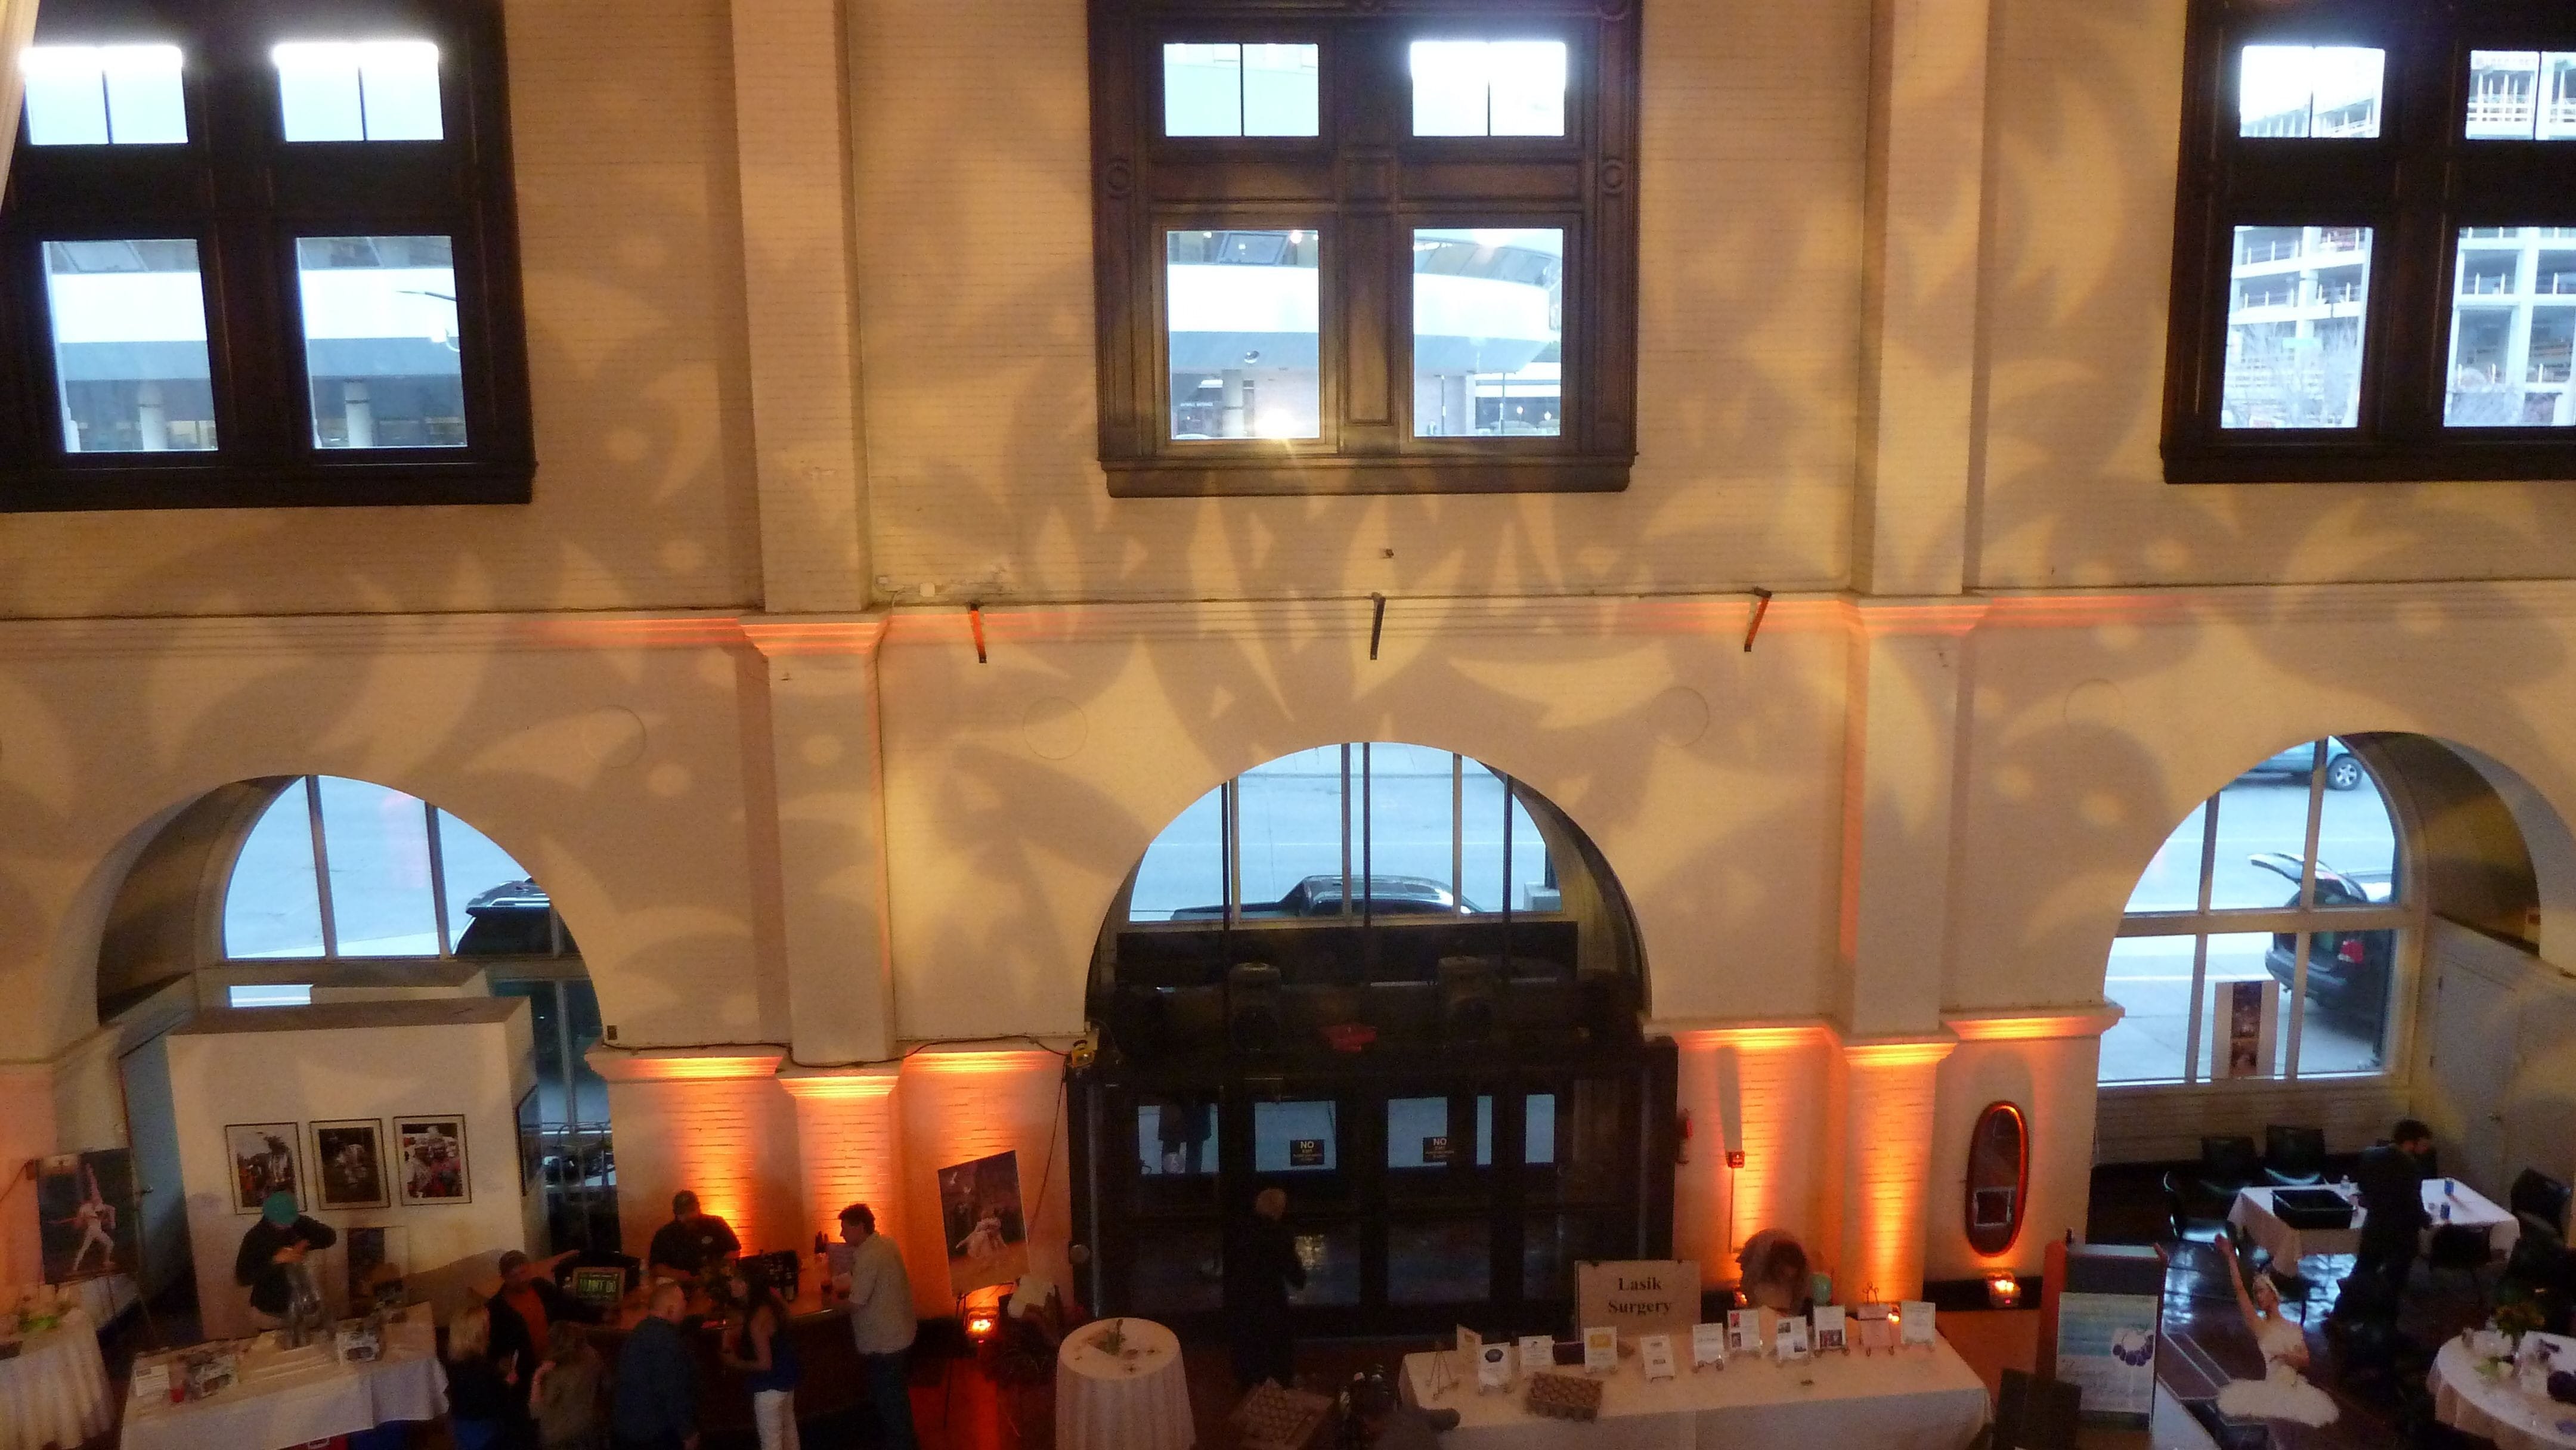 Up lighting in orange with gobos on the walls in the Depot Great Hall.